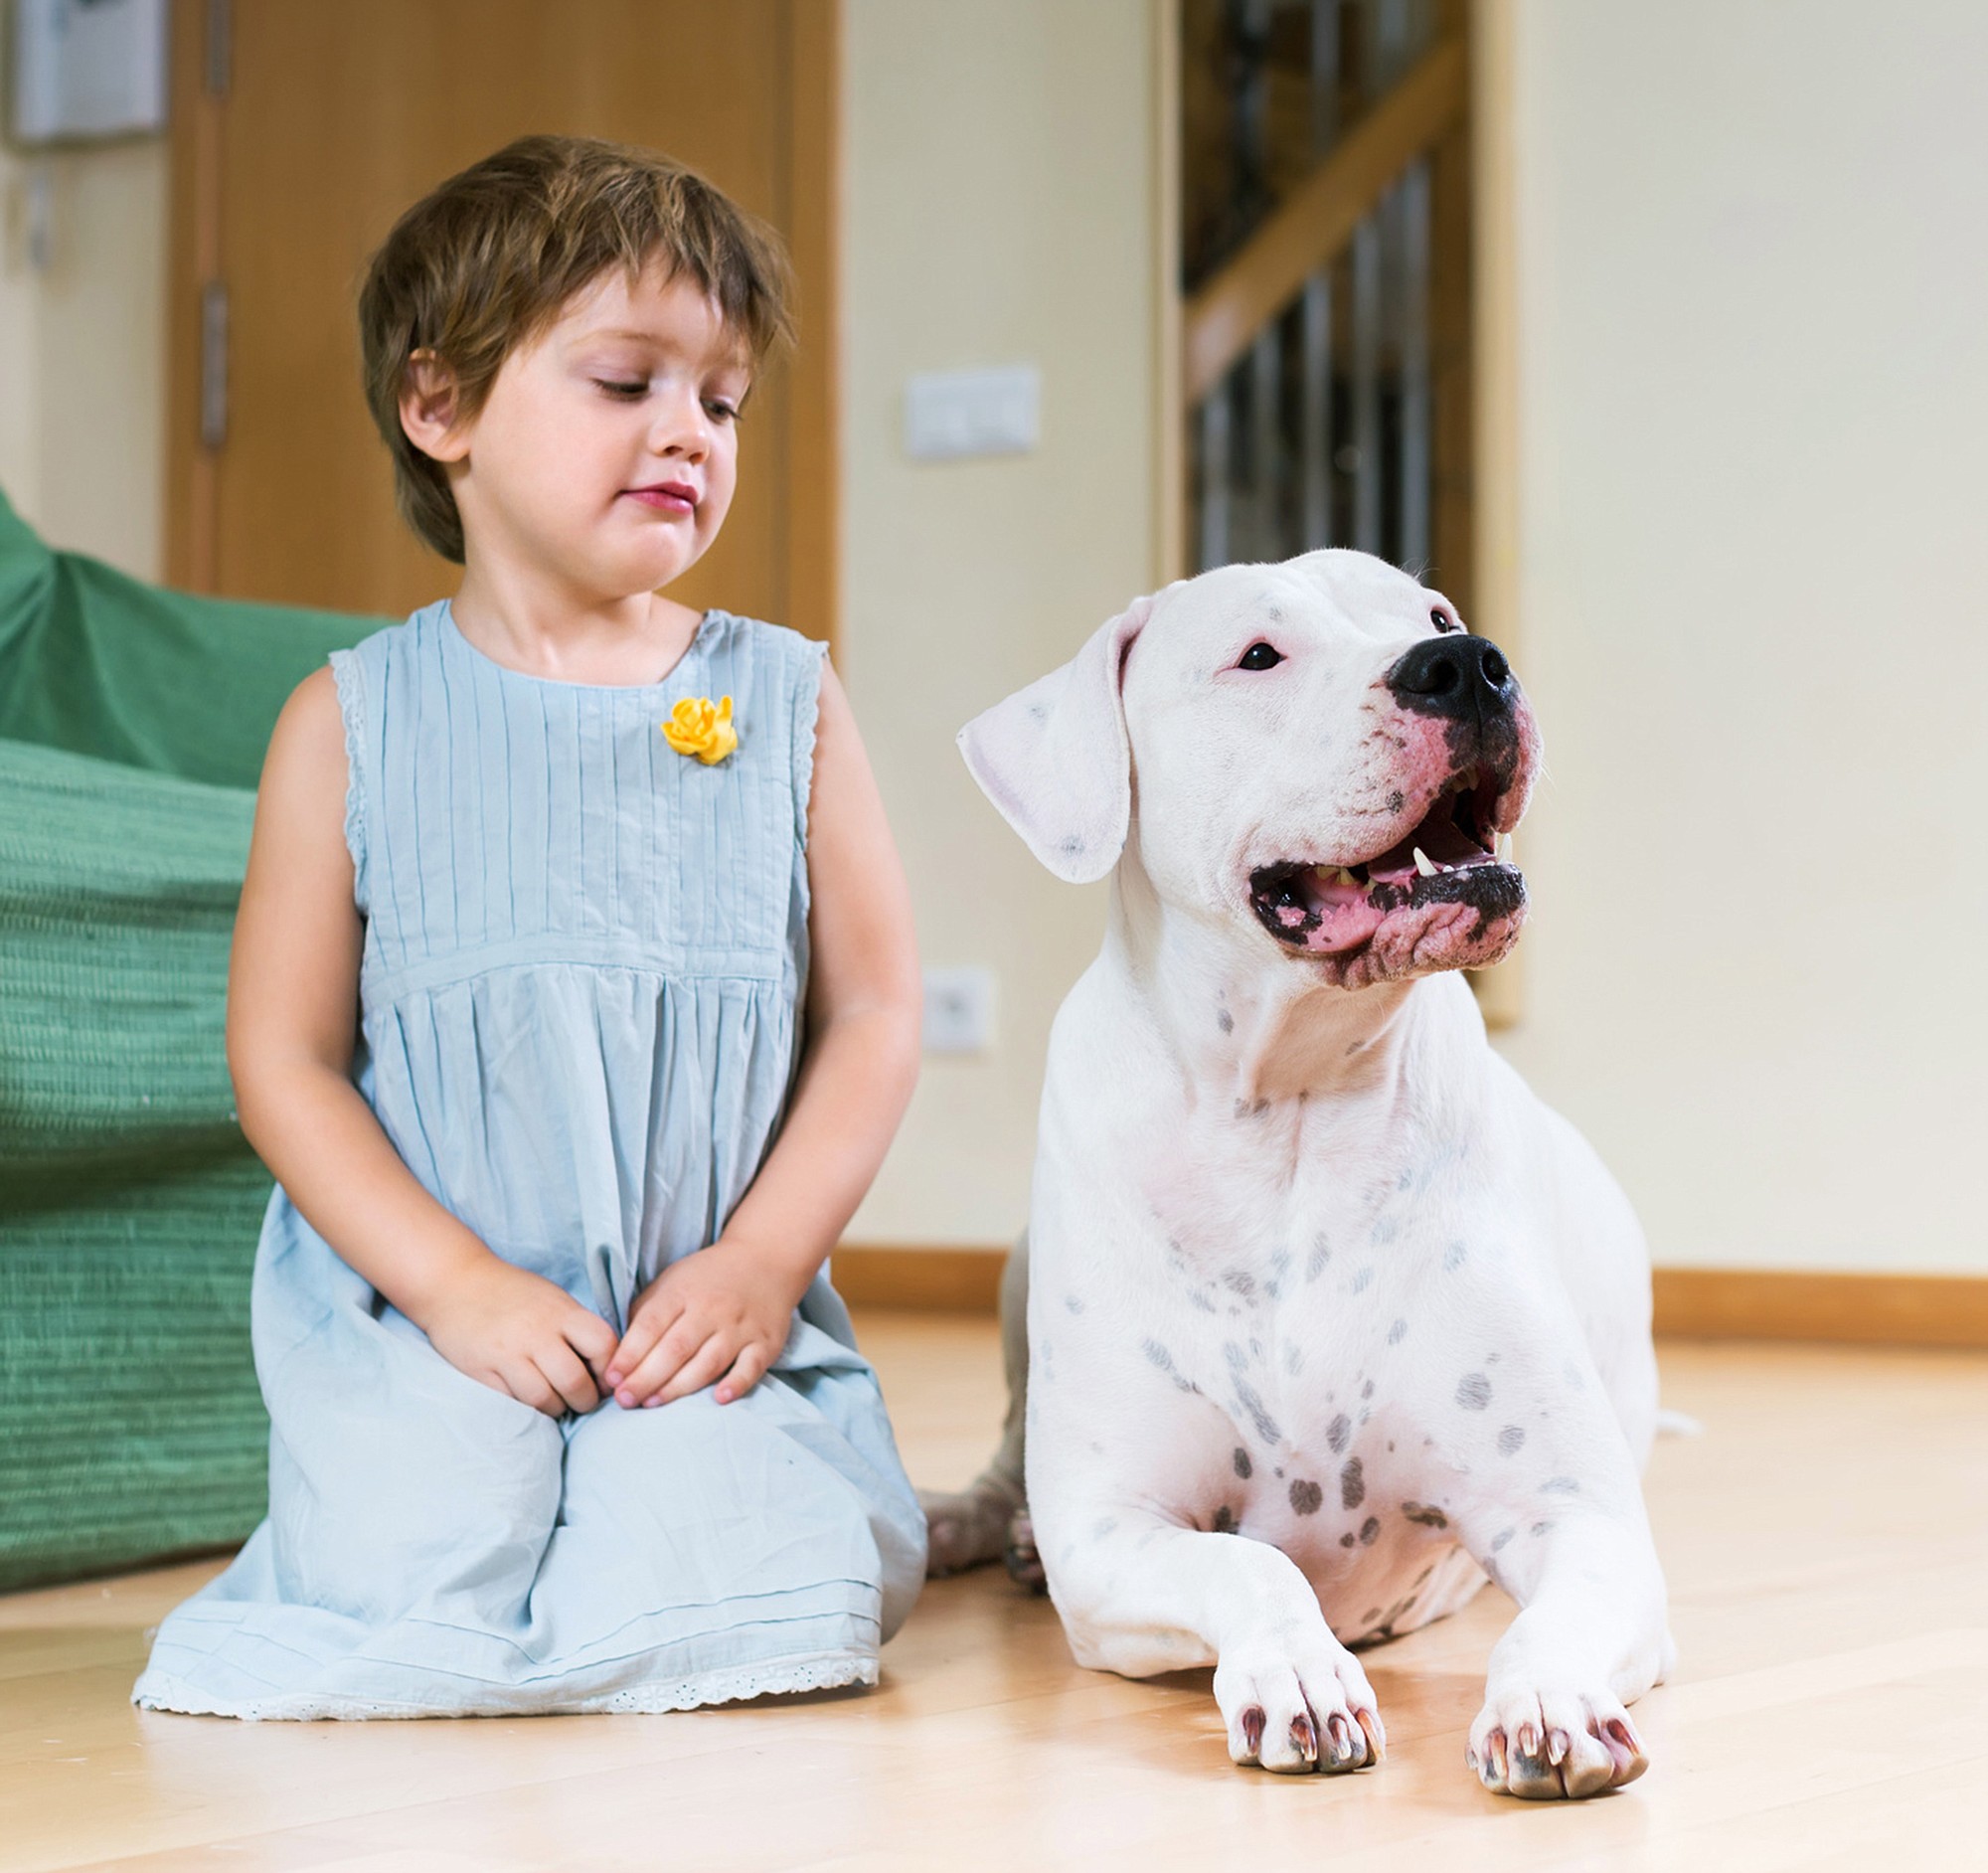 Fotolia
Capitalizing on kids' natural empathy with animals can help them overcome their fear of your pet.